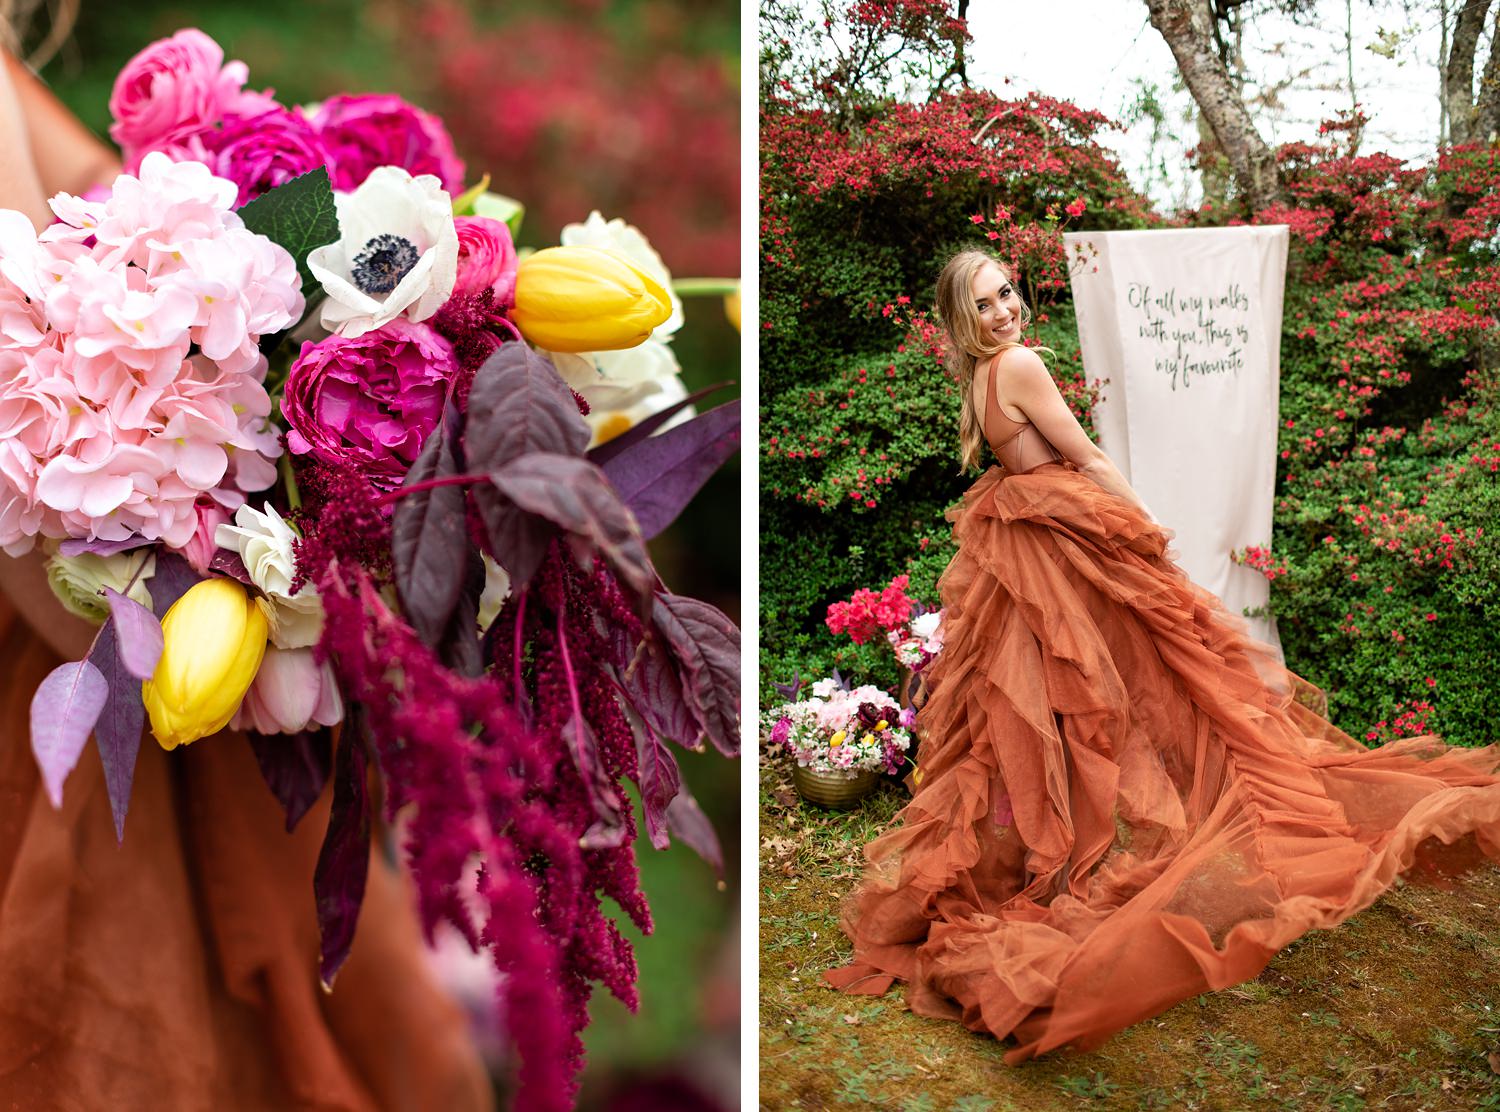 The blonde bride with loose fishtail braid models a colourful bouquet with anemones, country roses and tulips, and an alternative burnt orange wedding dress.